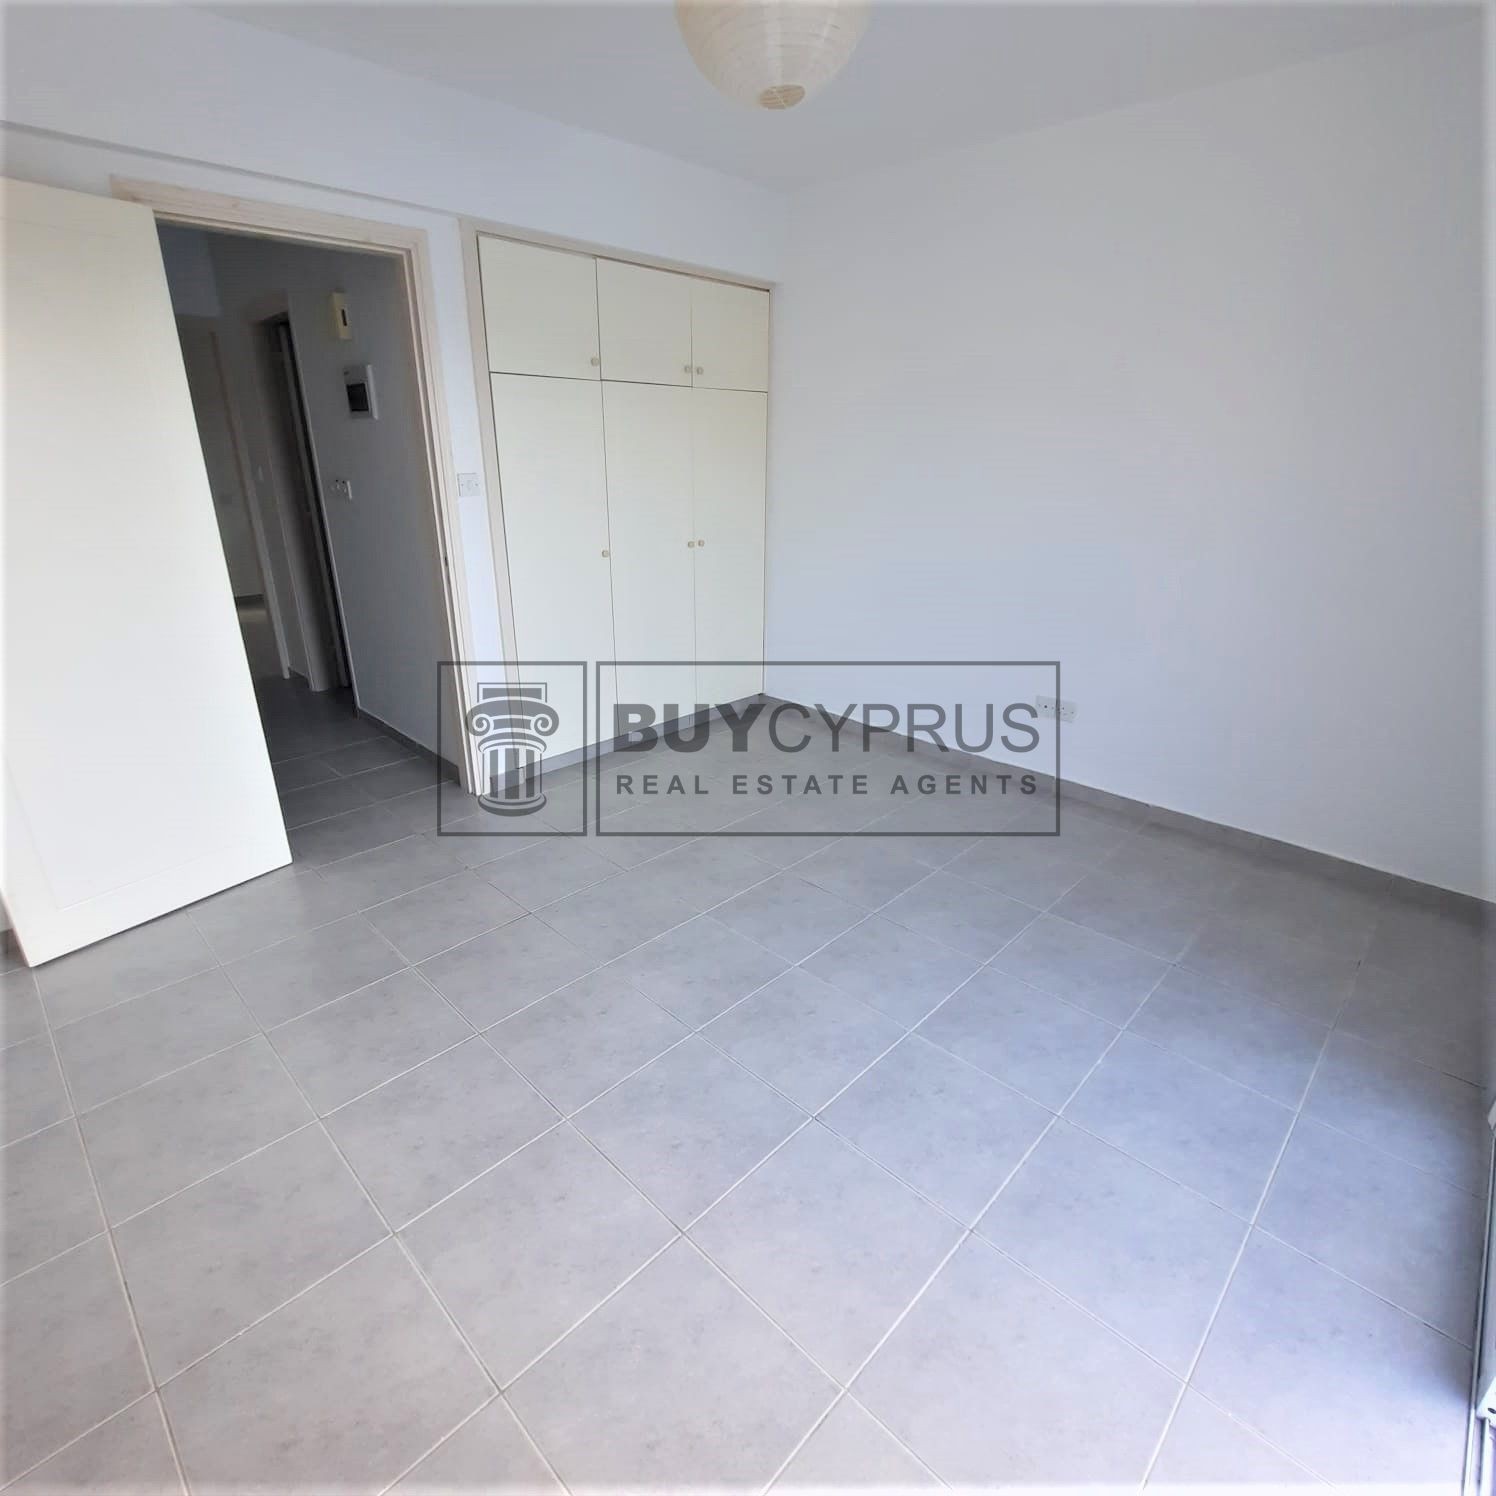 Town House For Sale in Peyia, Paphos - BC18092